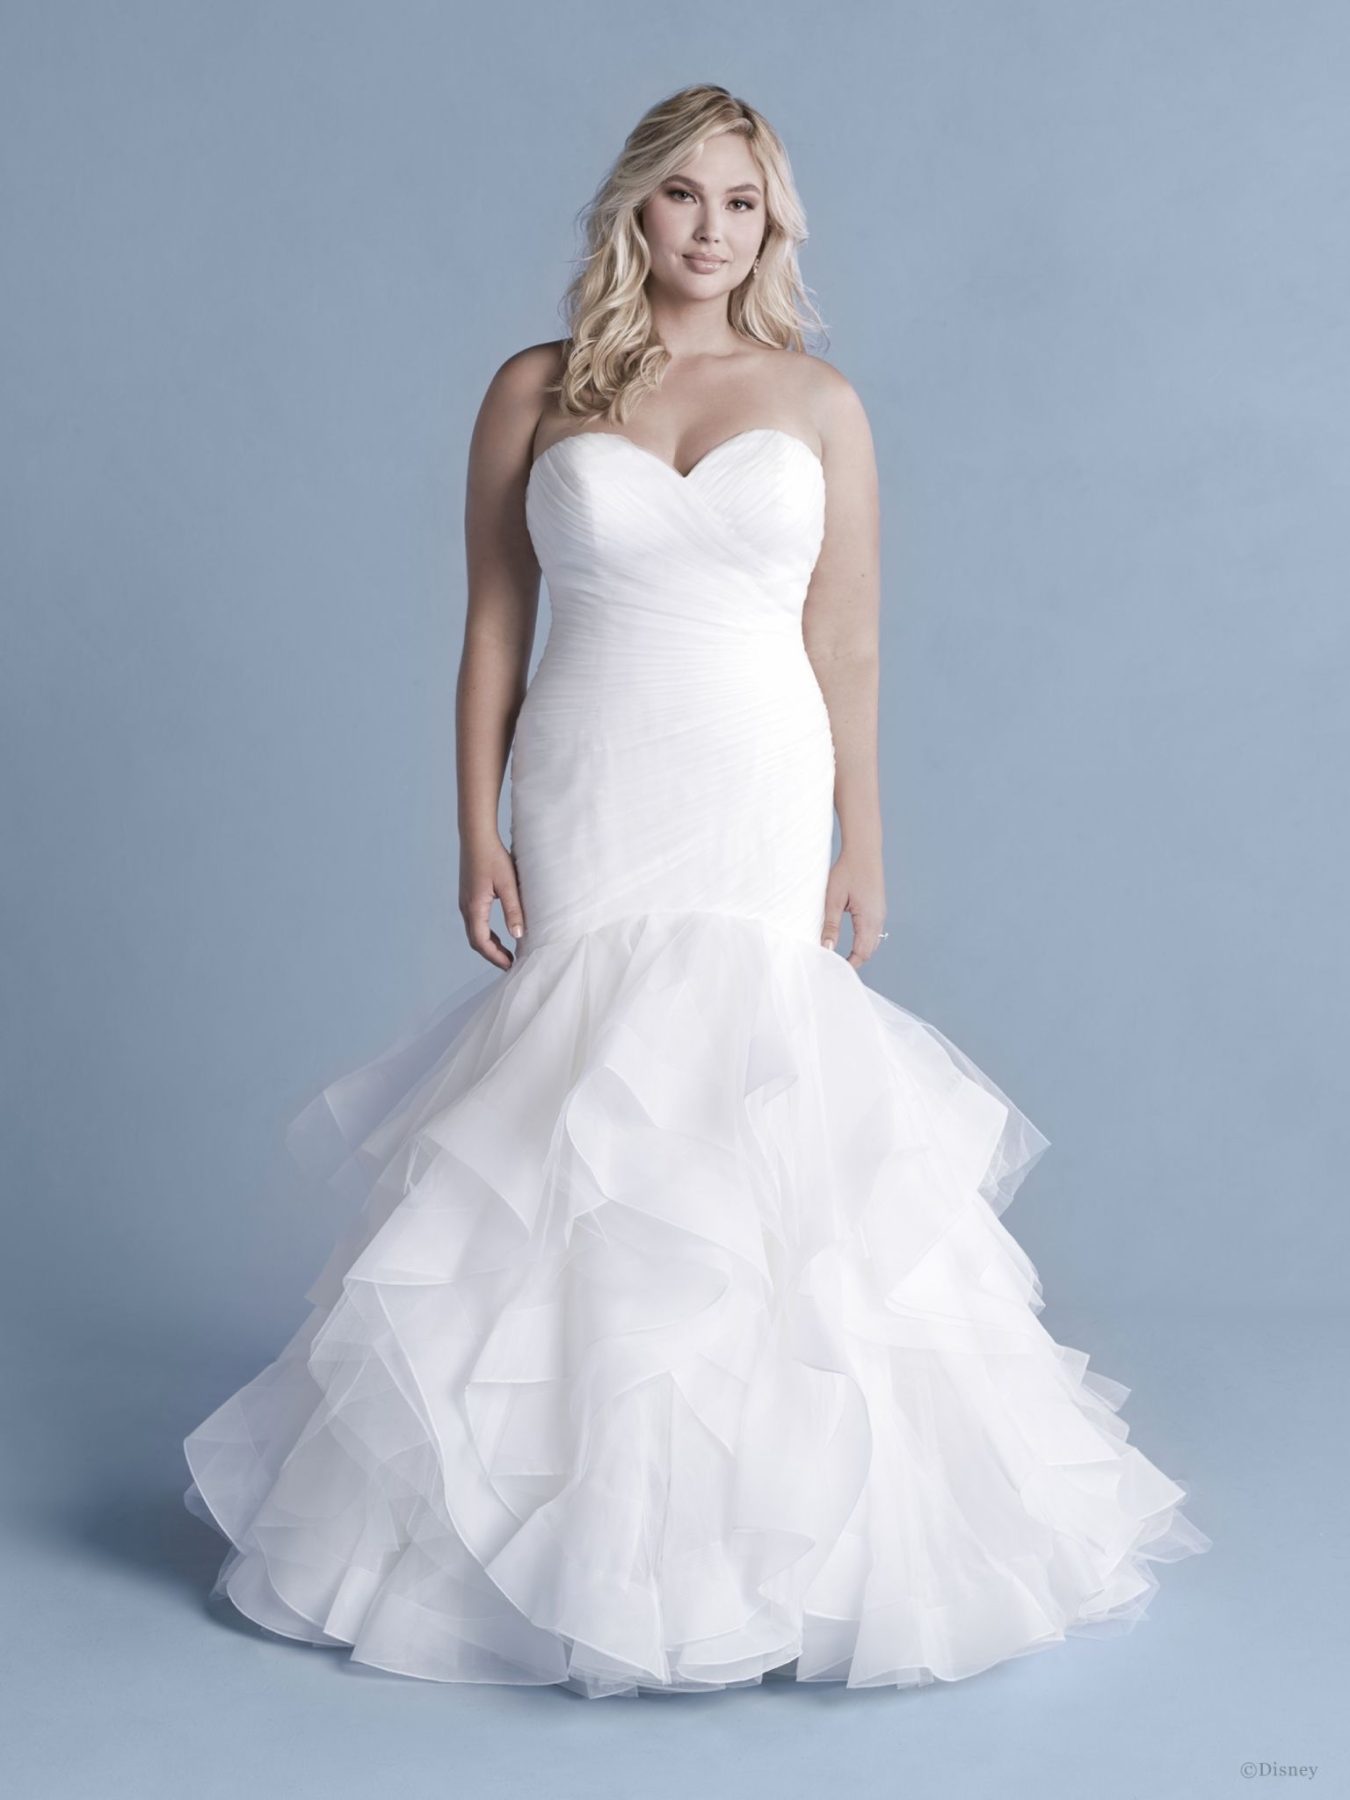 Great A Line Ruffle Wedding Dress  Check it out now 